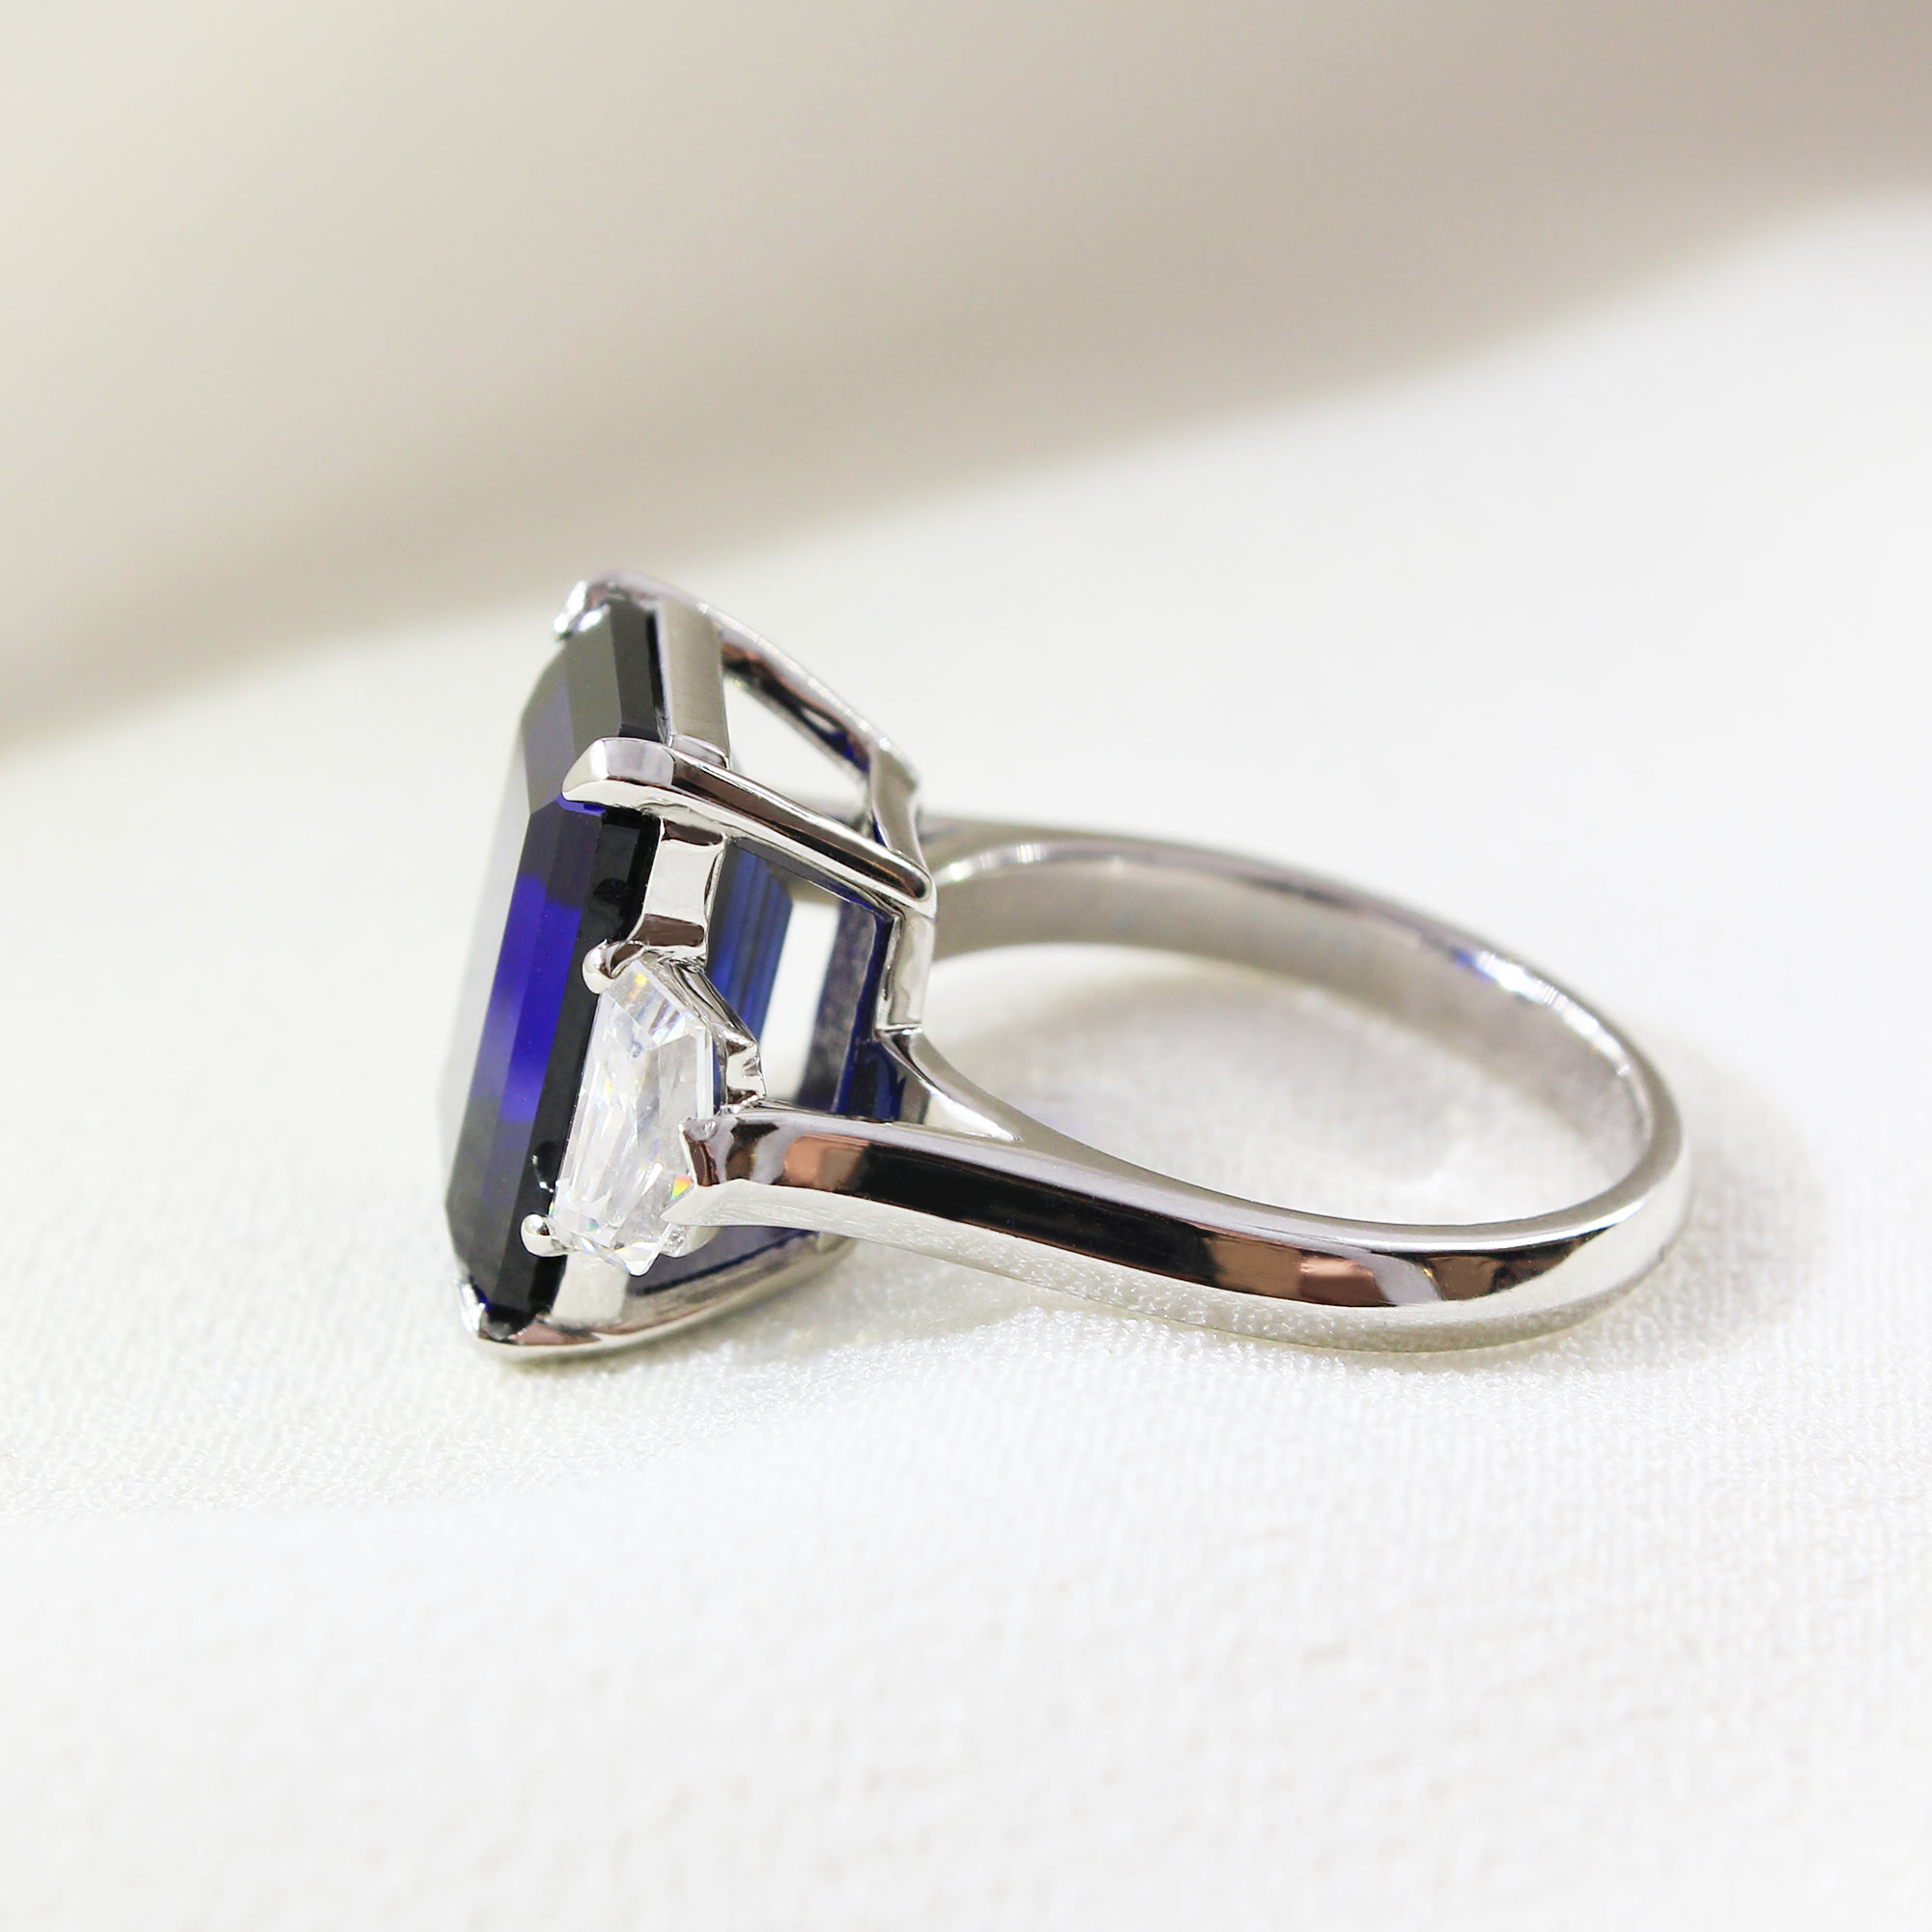 Emerald Cut Lab Grown Blue Sapphire Engagement Ring 10ct